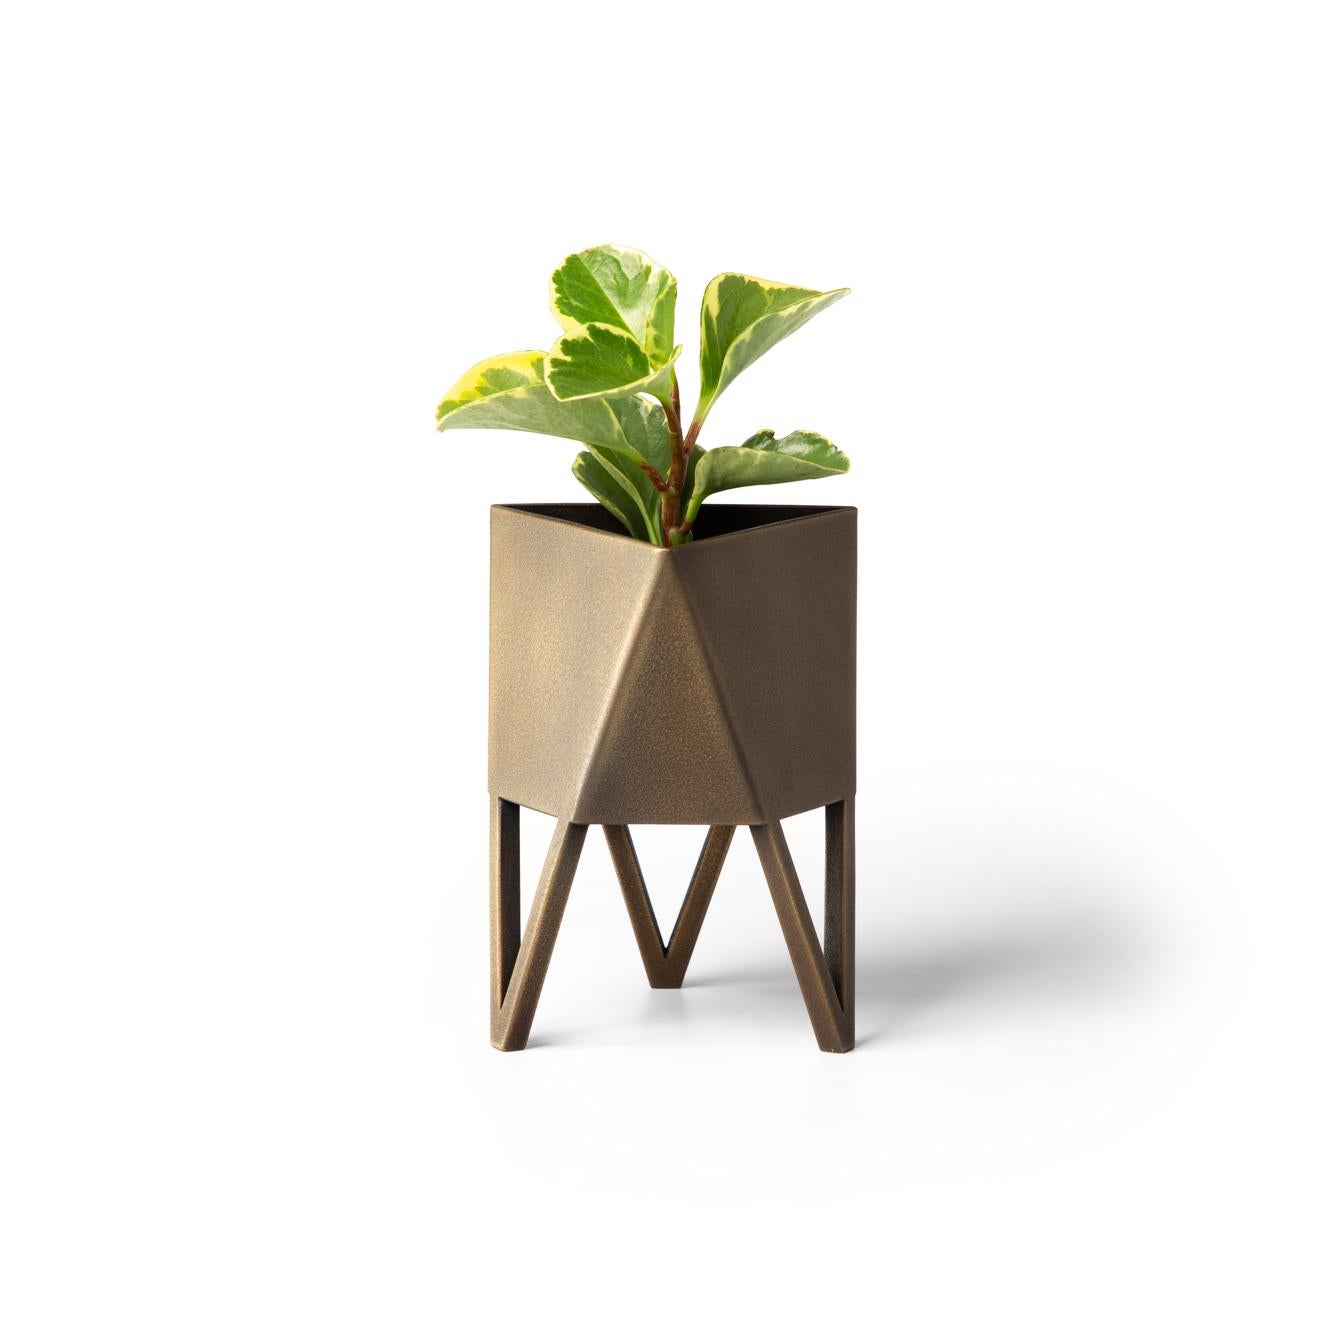 Deca Planter in Mars By Force/Collide, Size Medium, 2023 For Sale 8